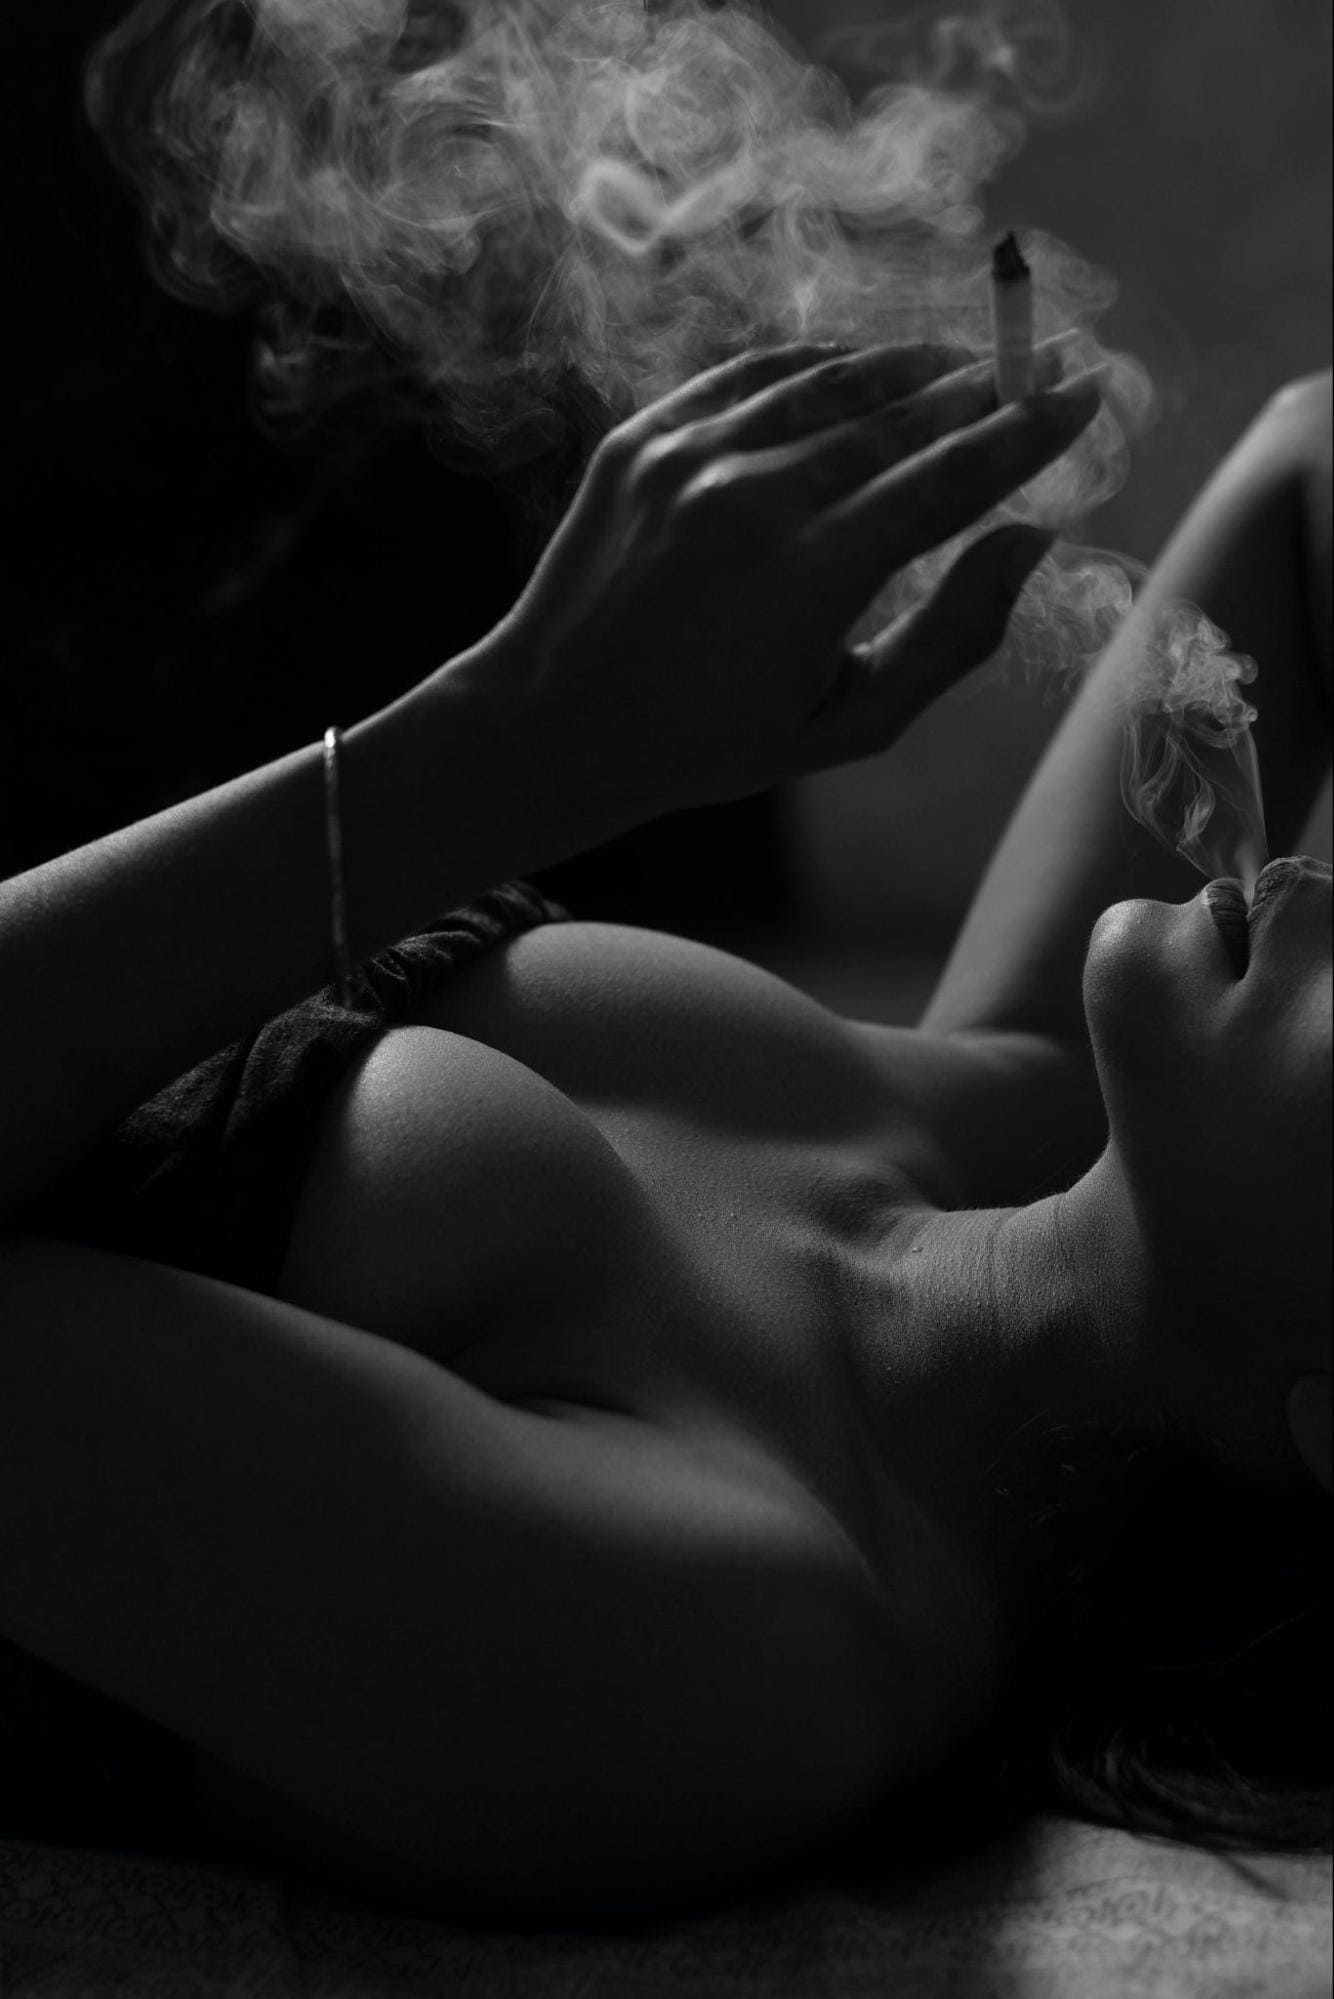 Does smoking affects SEX?